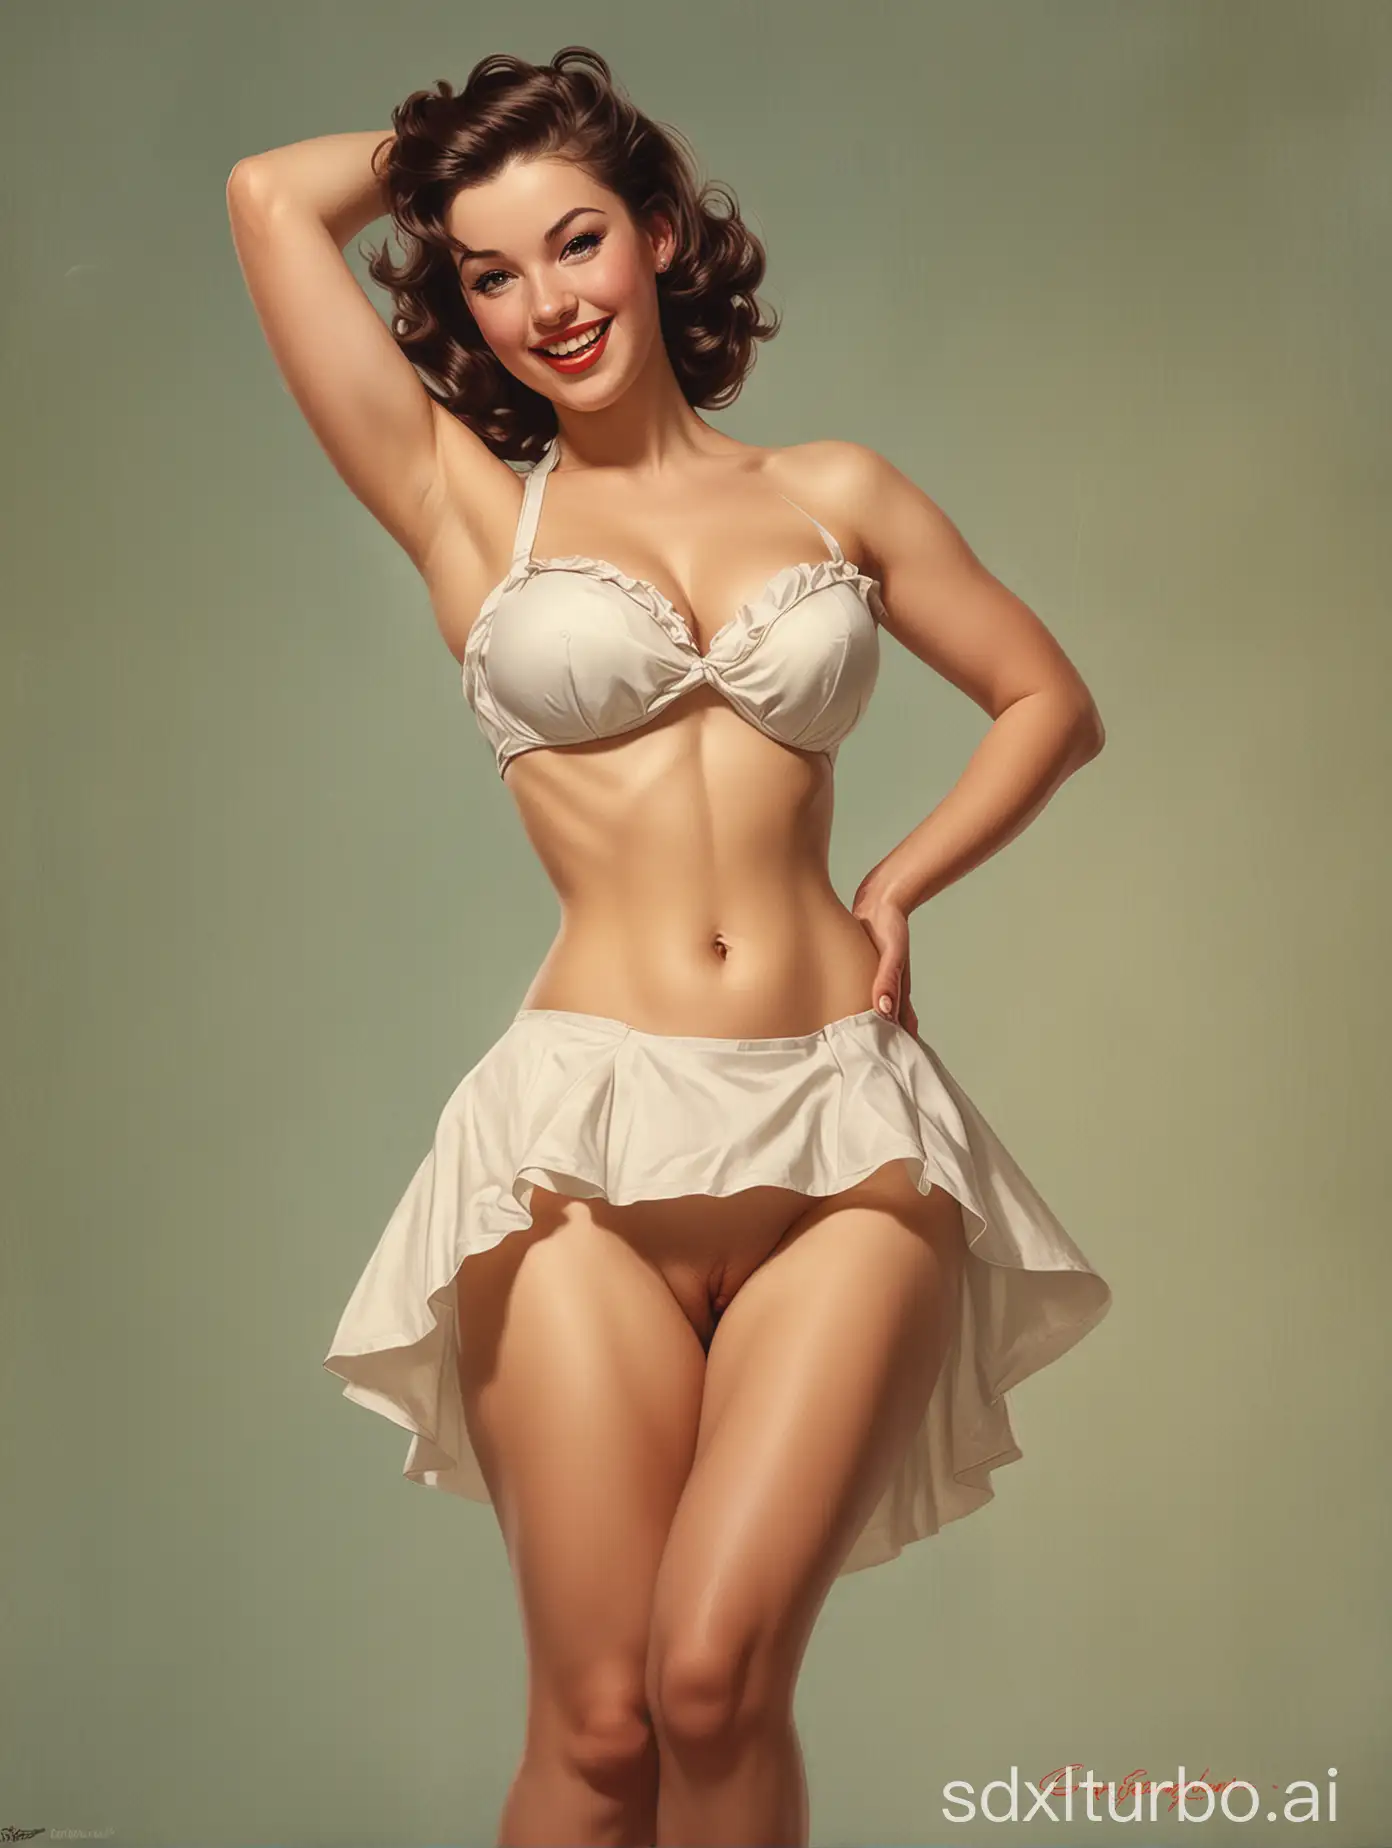 upshot, naked upskirt view of a woman, a Gil Elvgren style painting, high resolution: artgerm, pin-up style poster, idealized, smiling, sexy